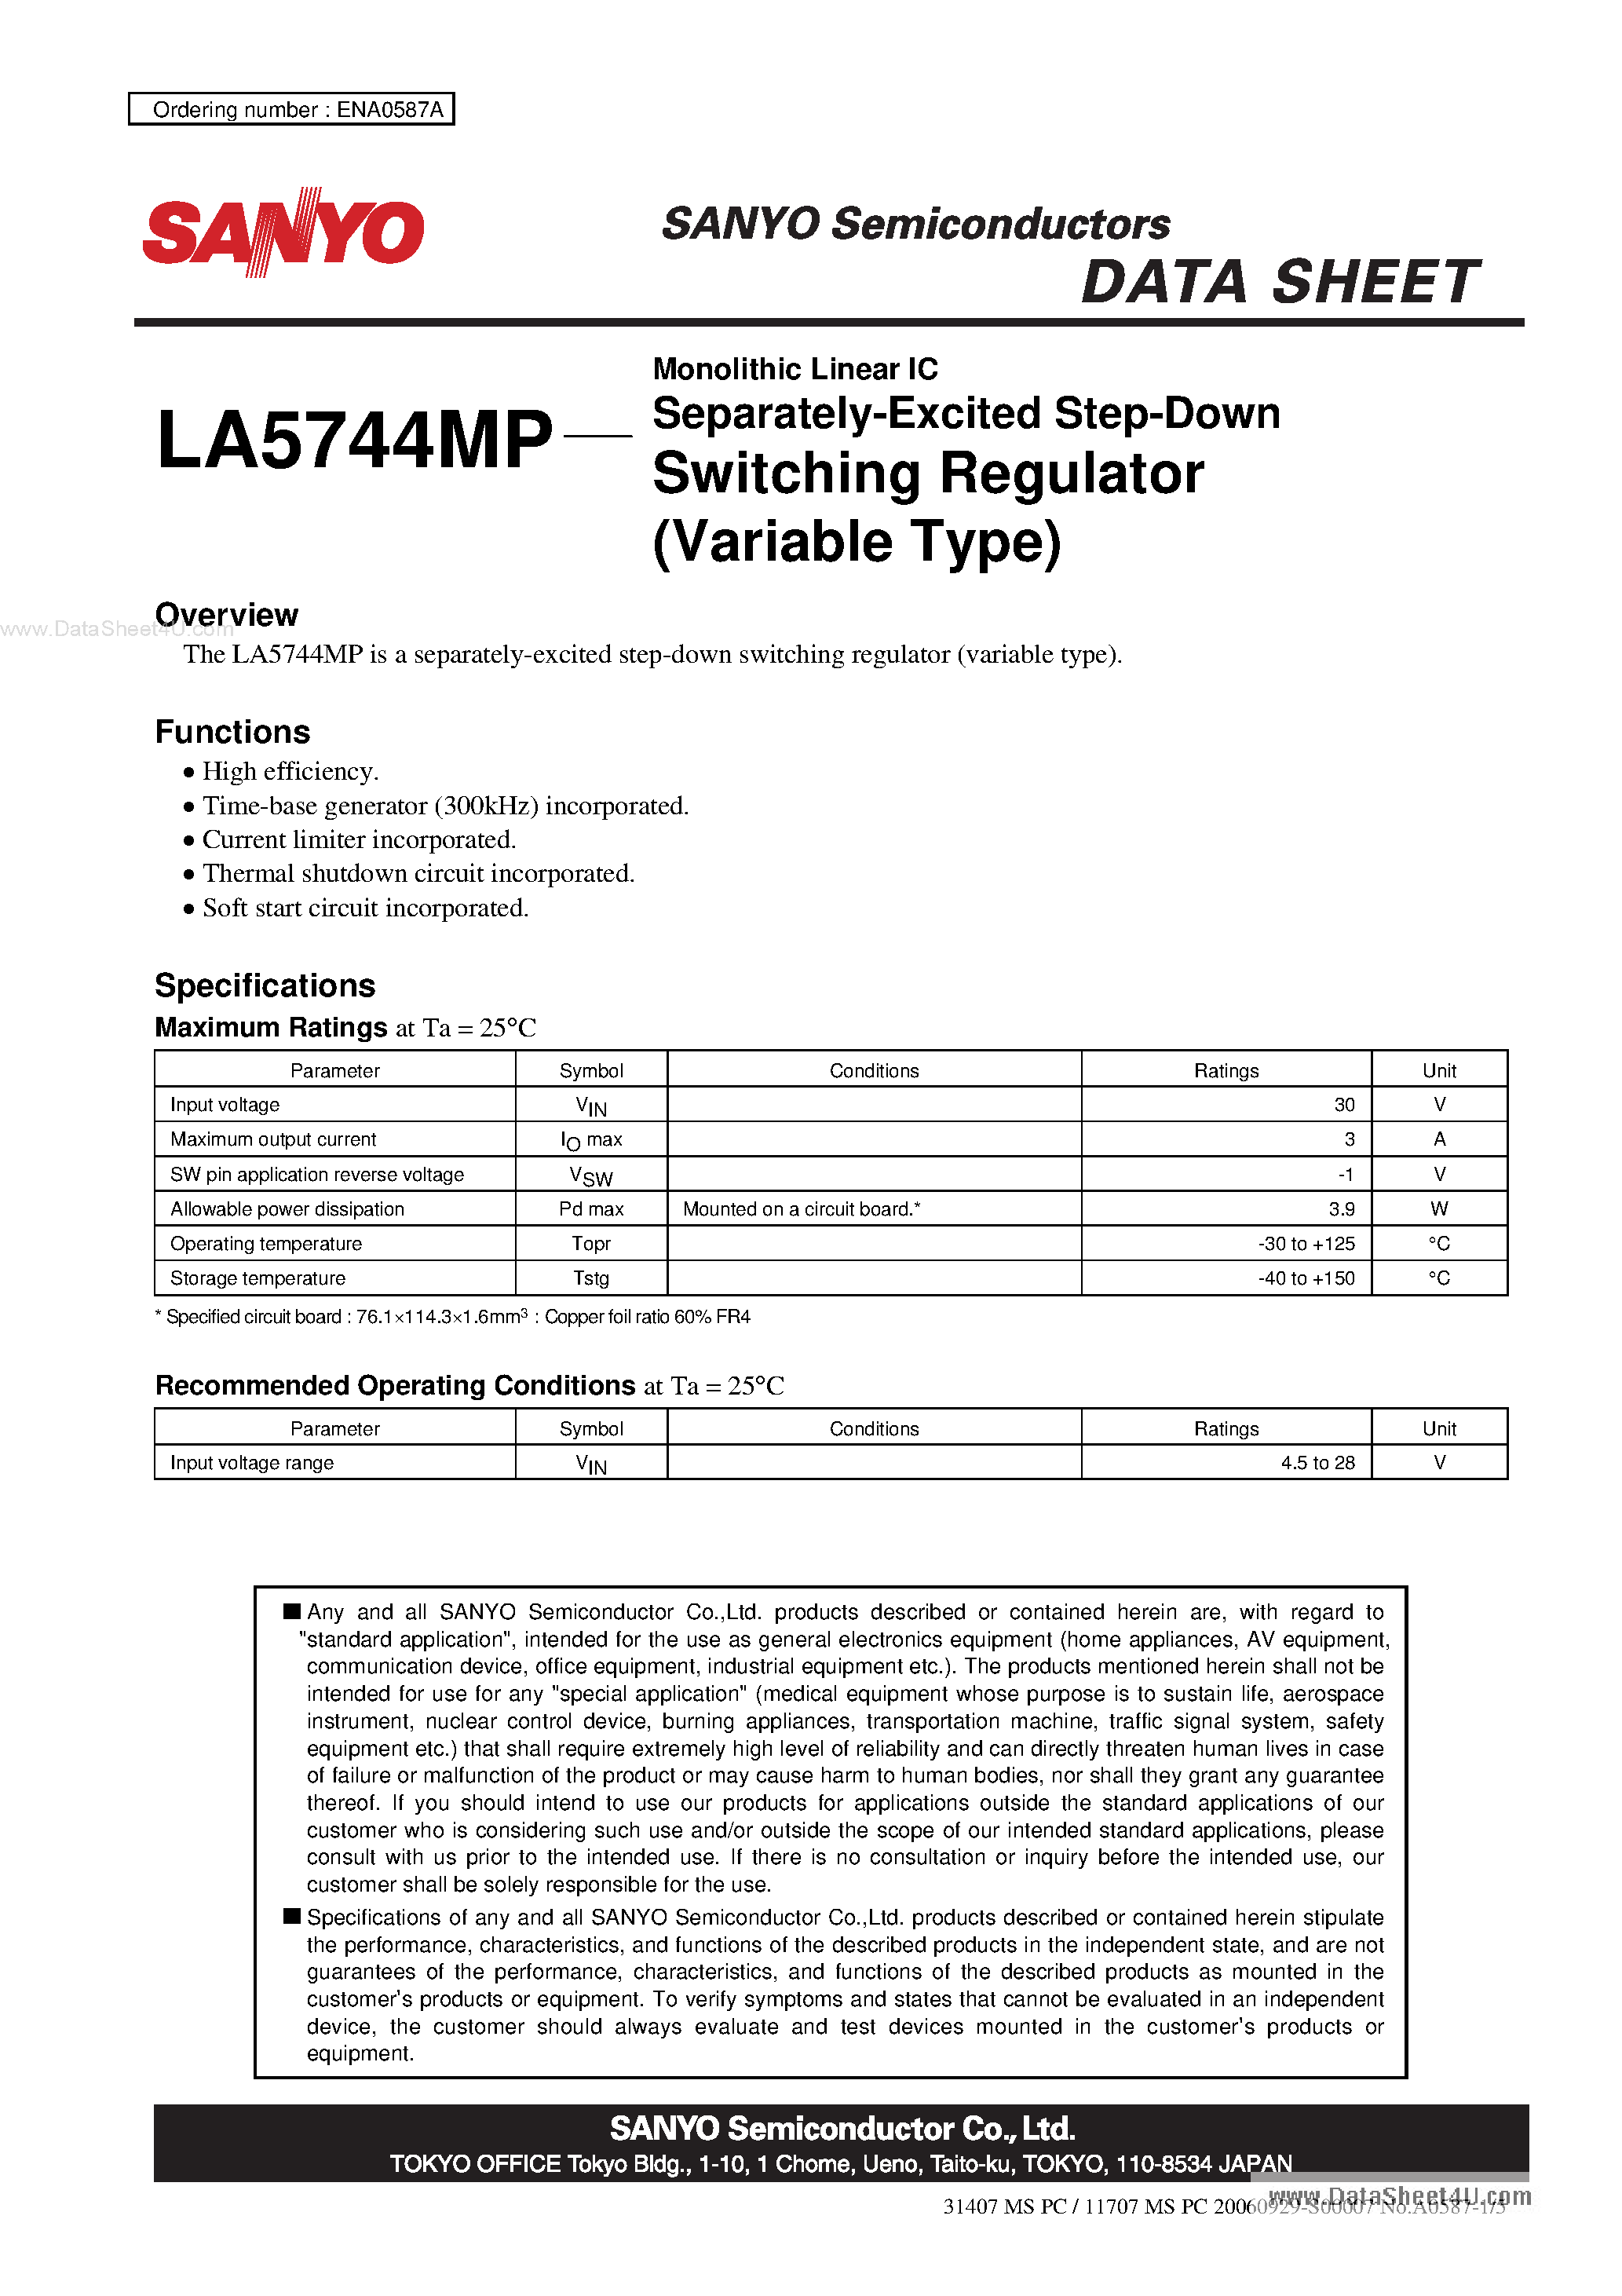 Даташит LA5744MP - Monolithic Linear IC Separately-Excited Step-Down Switching Regulator страница 1